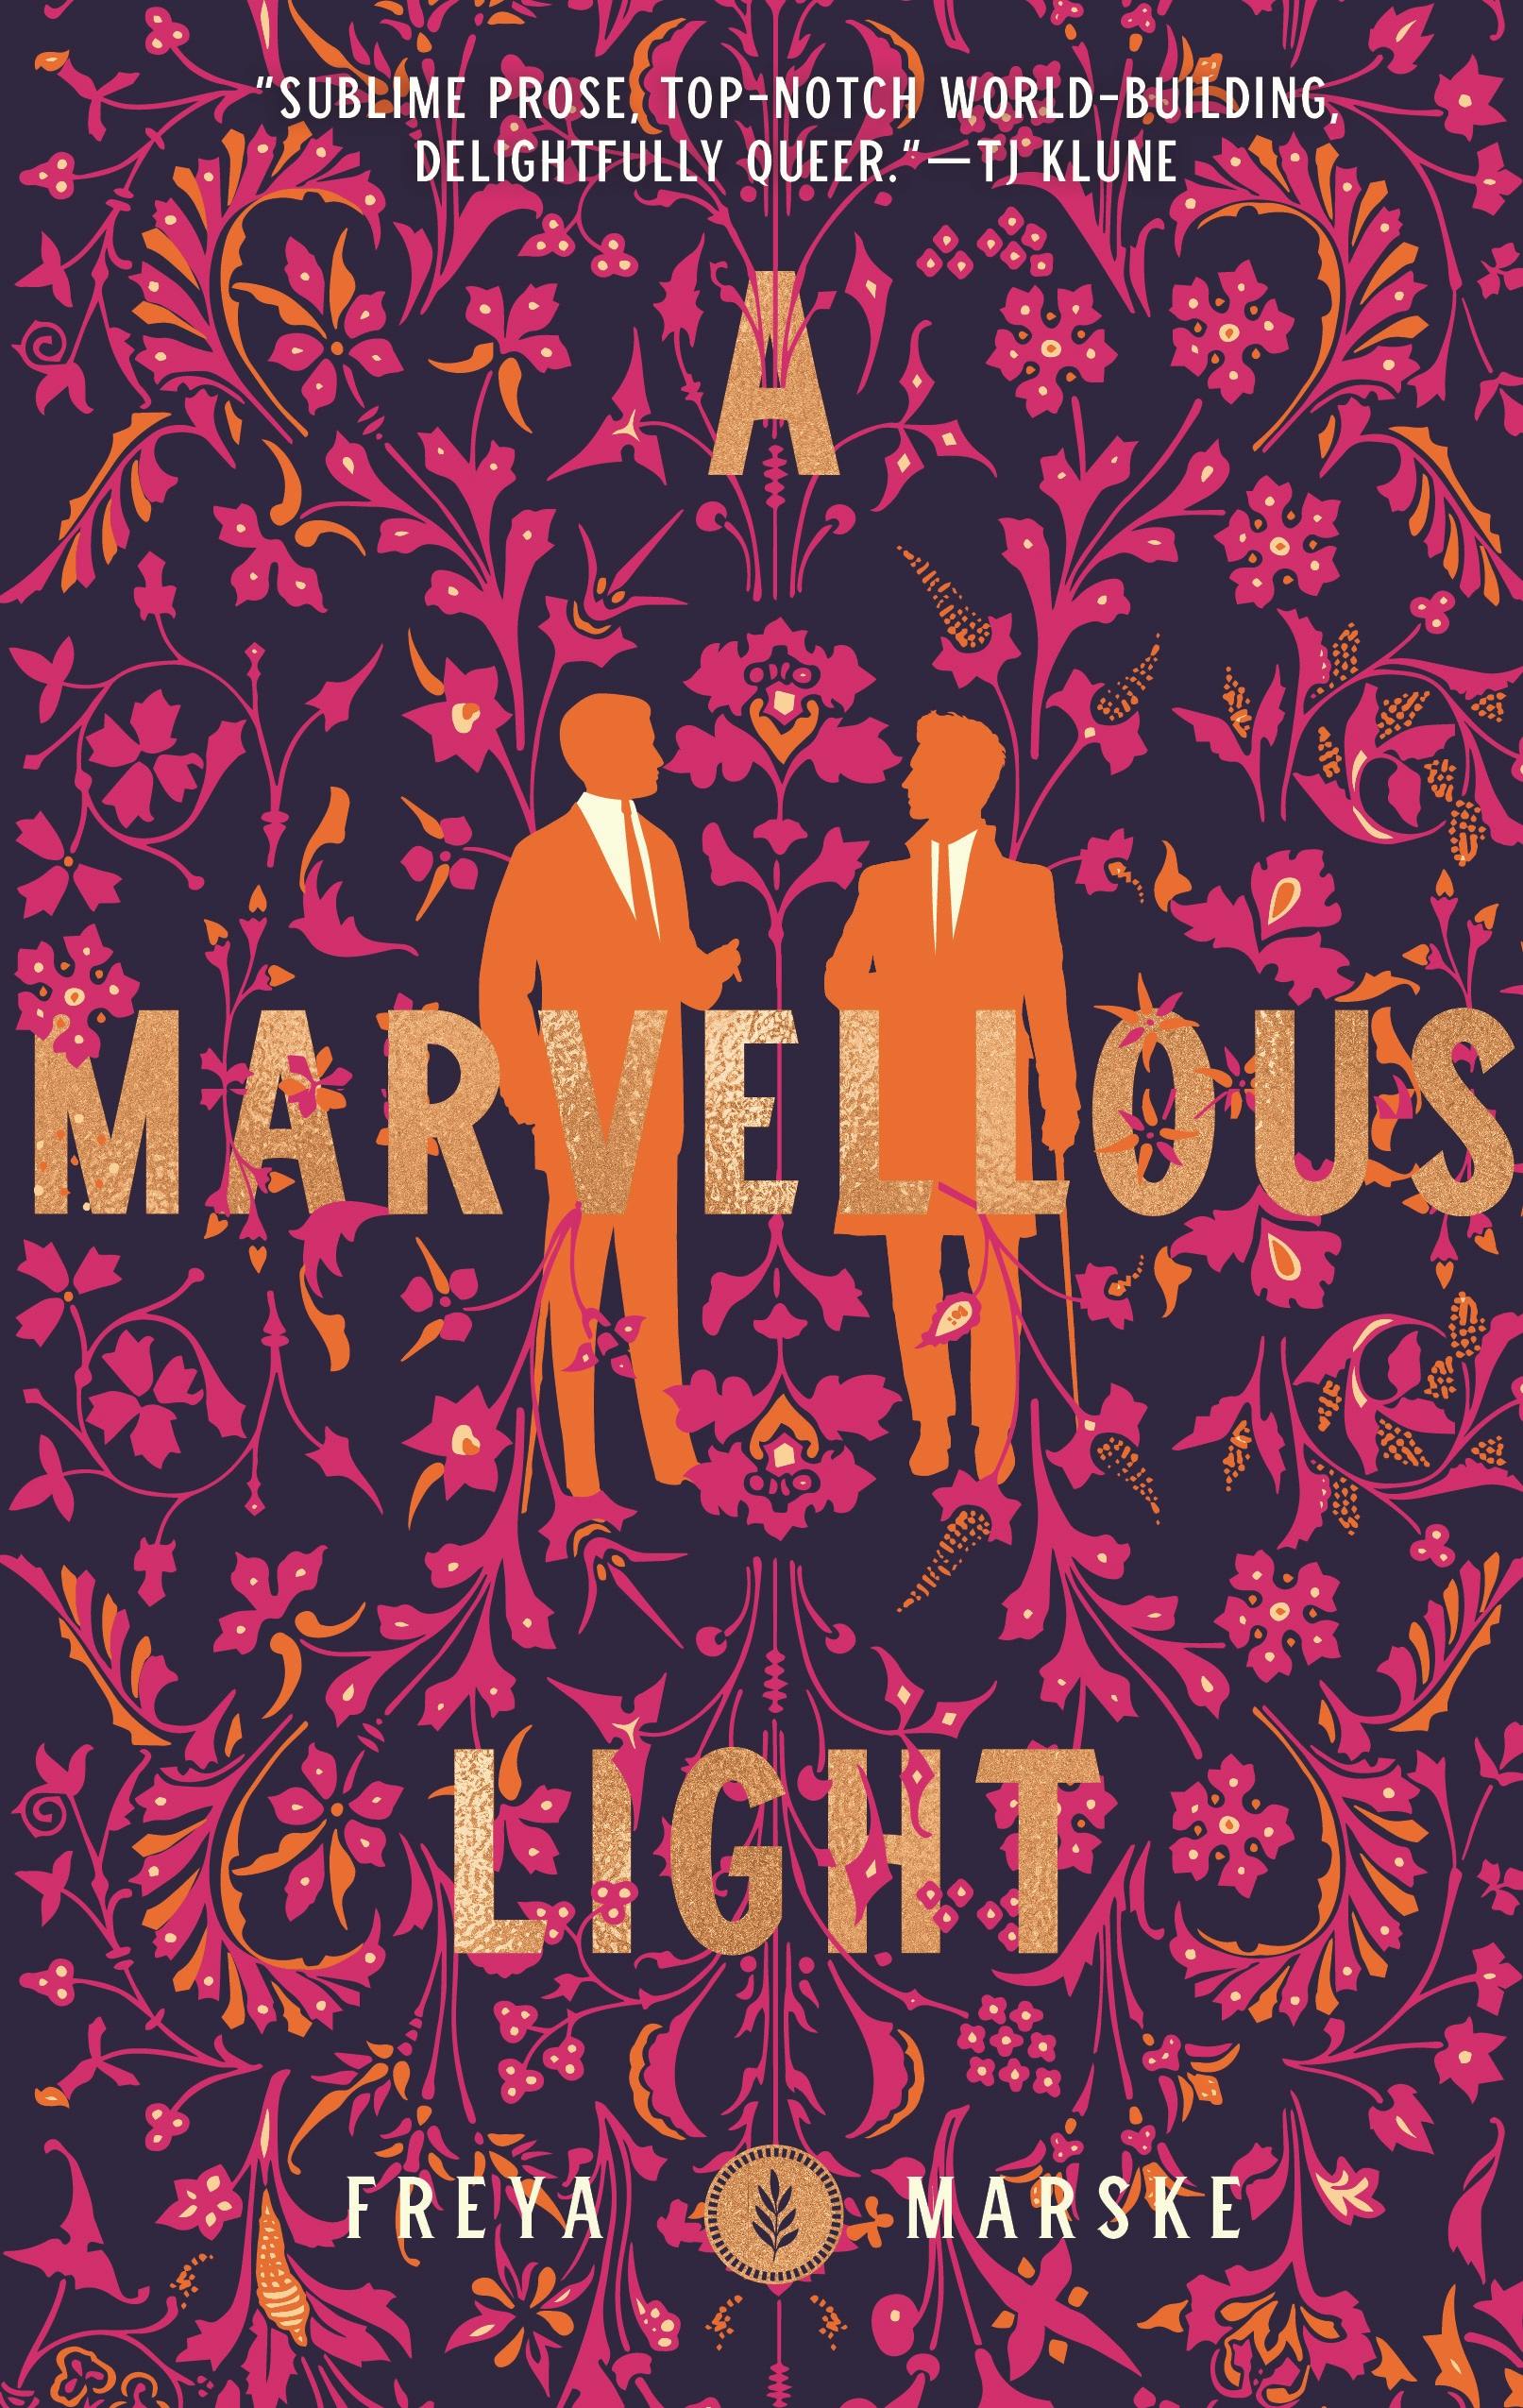 Cover for the book titled as: A Marvellous Light